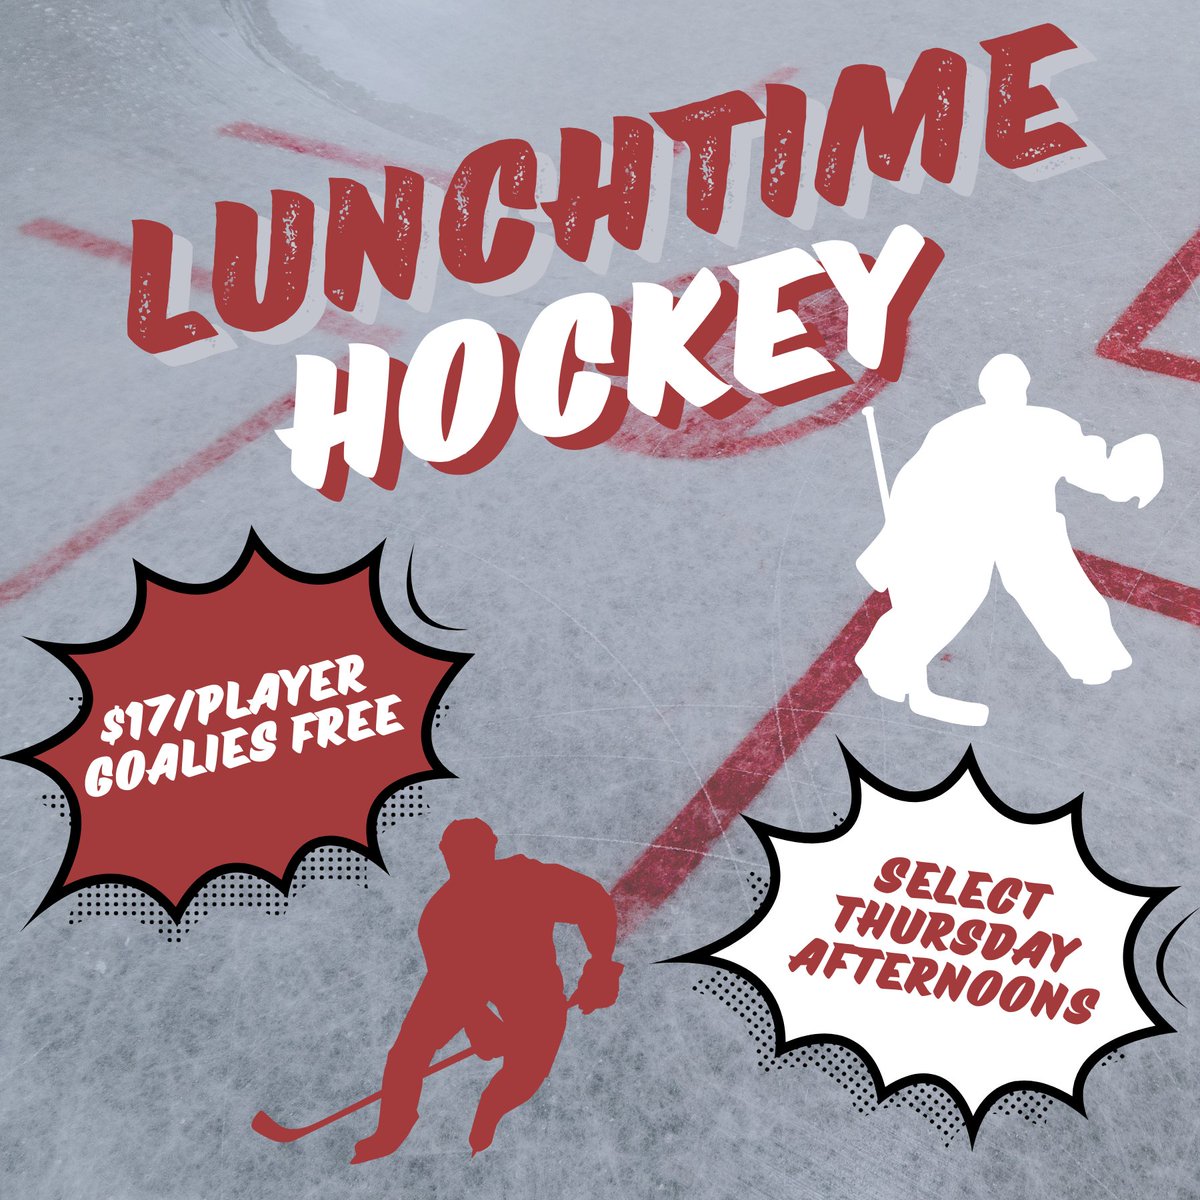 Do you work from home? Have the day off? Get a long lunch hour? Spend it at the rink with our new Lunchtime Hockey session🏒Players age 18+ of all skill levels will enjoy these Thursday afternoon pick-up games! Debuting next Thursday, May 9. More info: bit.ly/LTHCKY